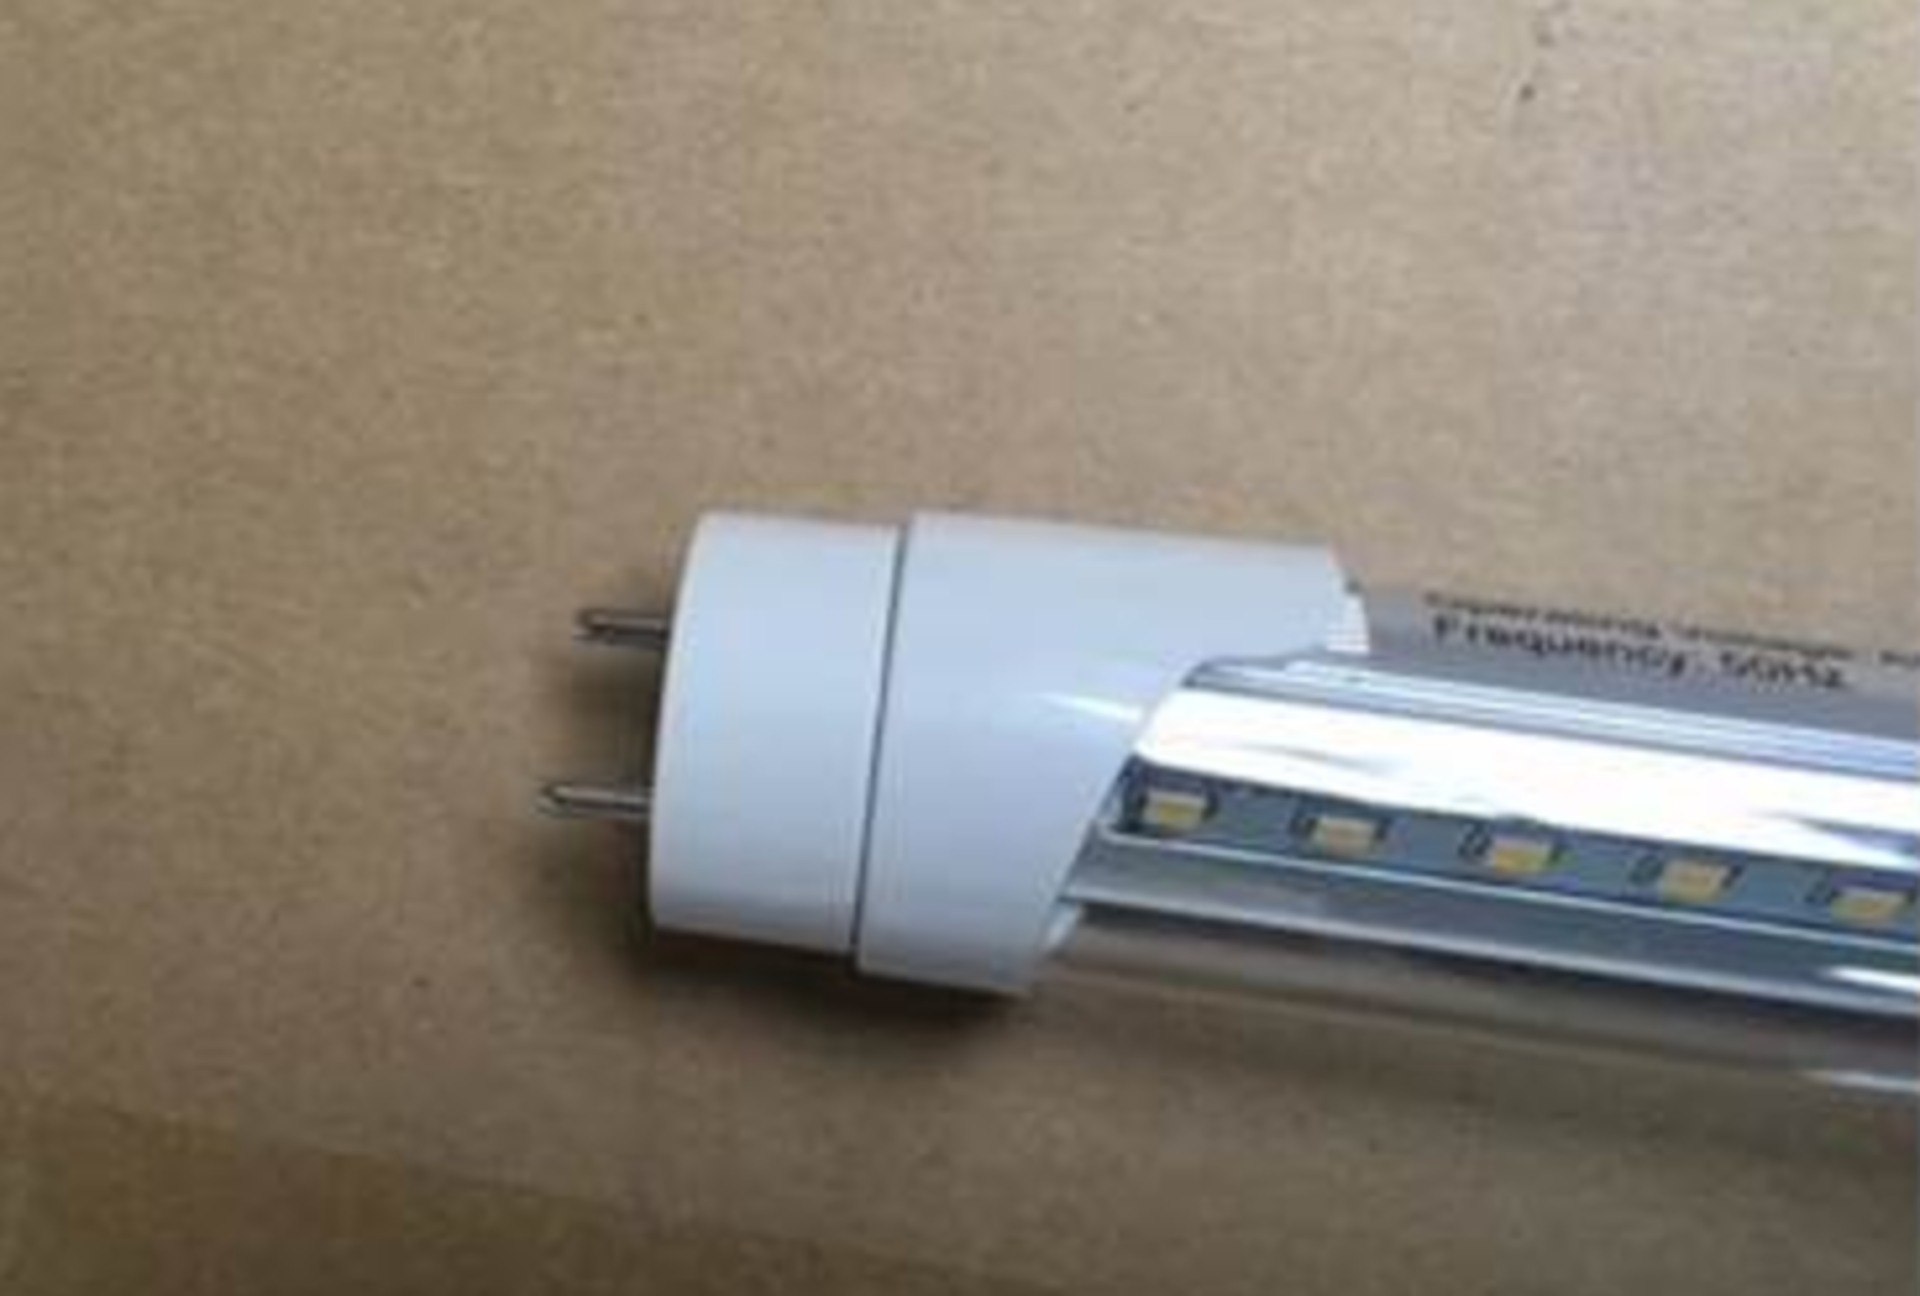 New 200x Led Tube Lights New Boxed With Built In Driver - Image 3 of 4